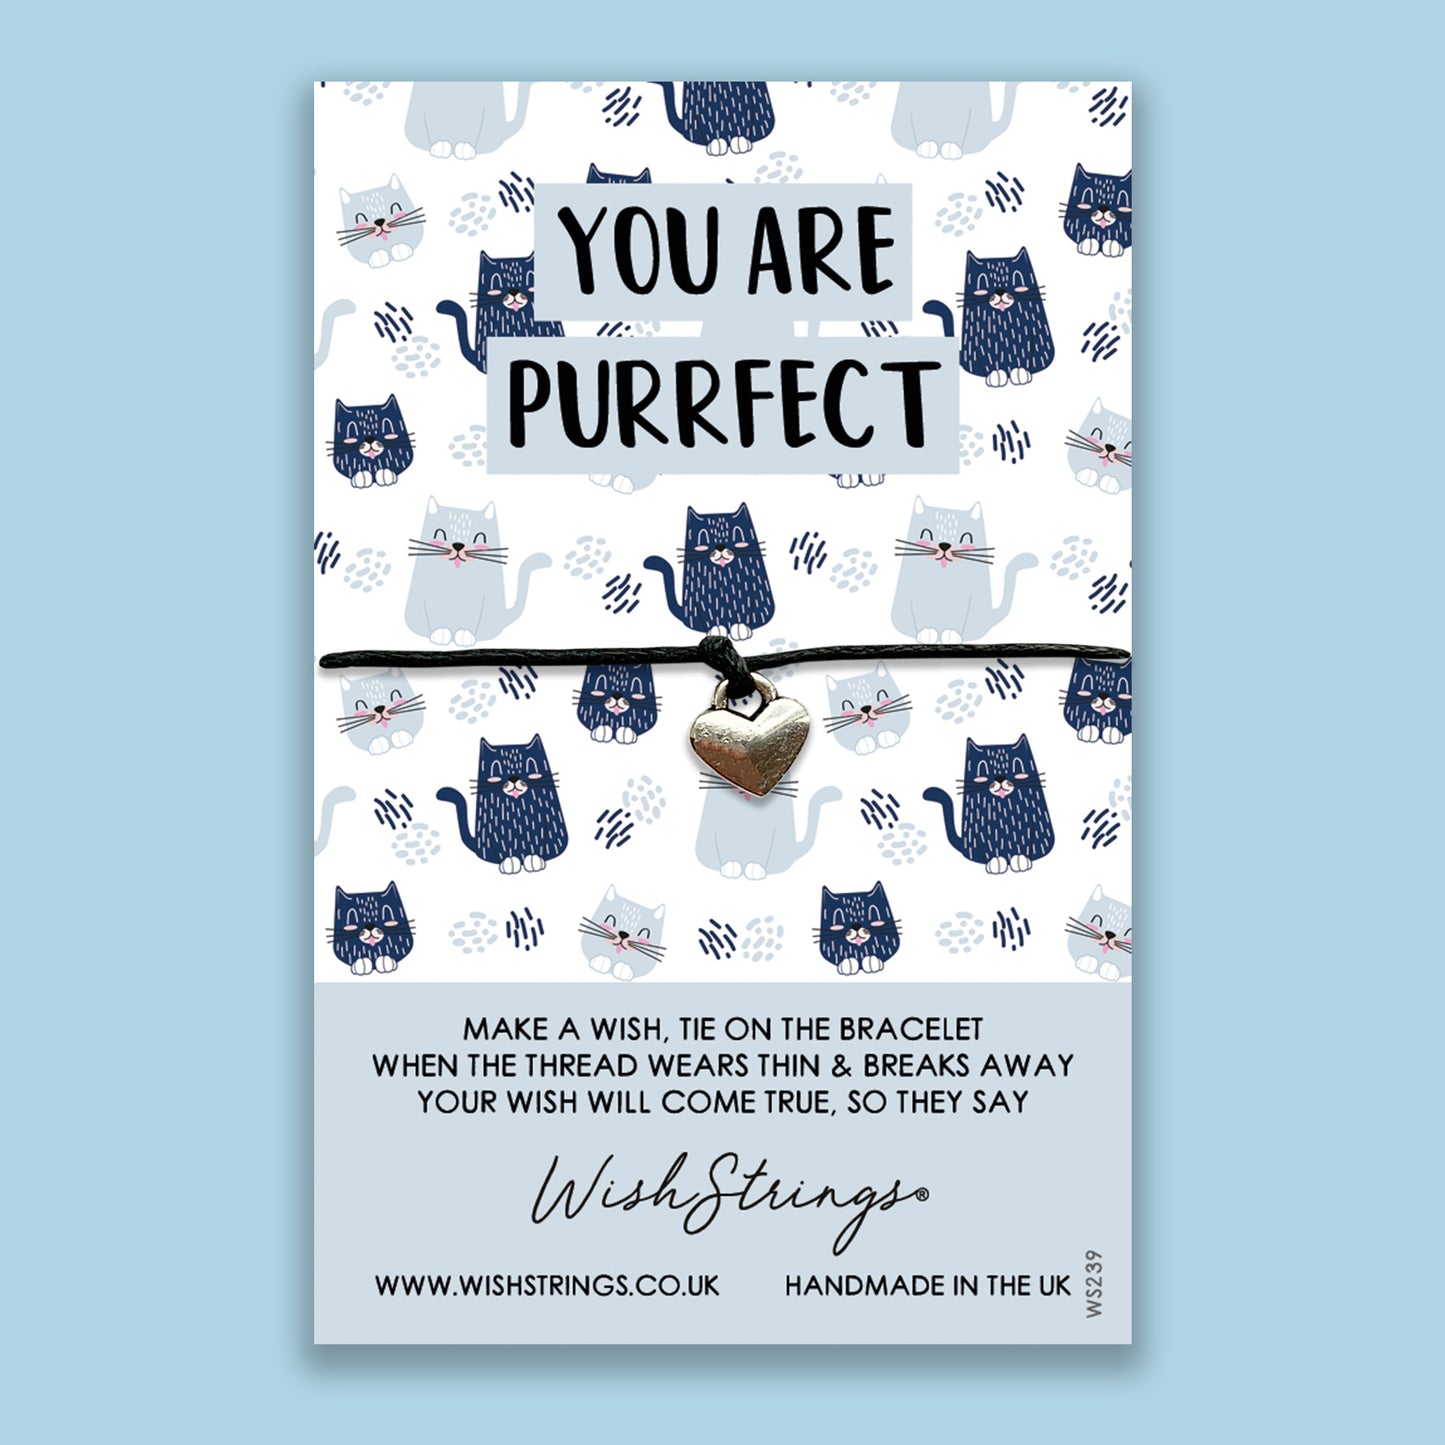 You Are Purrfect - WishStrings Wish Bracelet